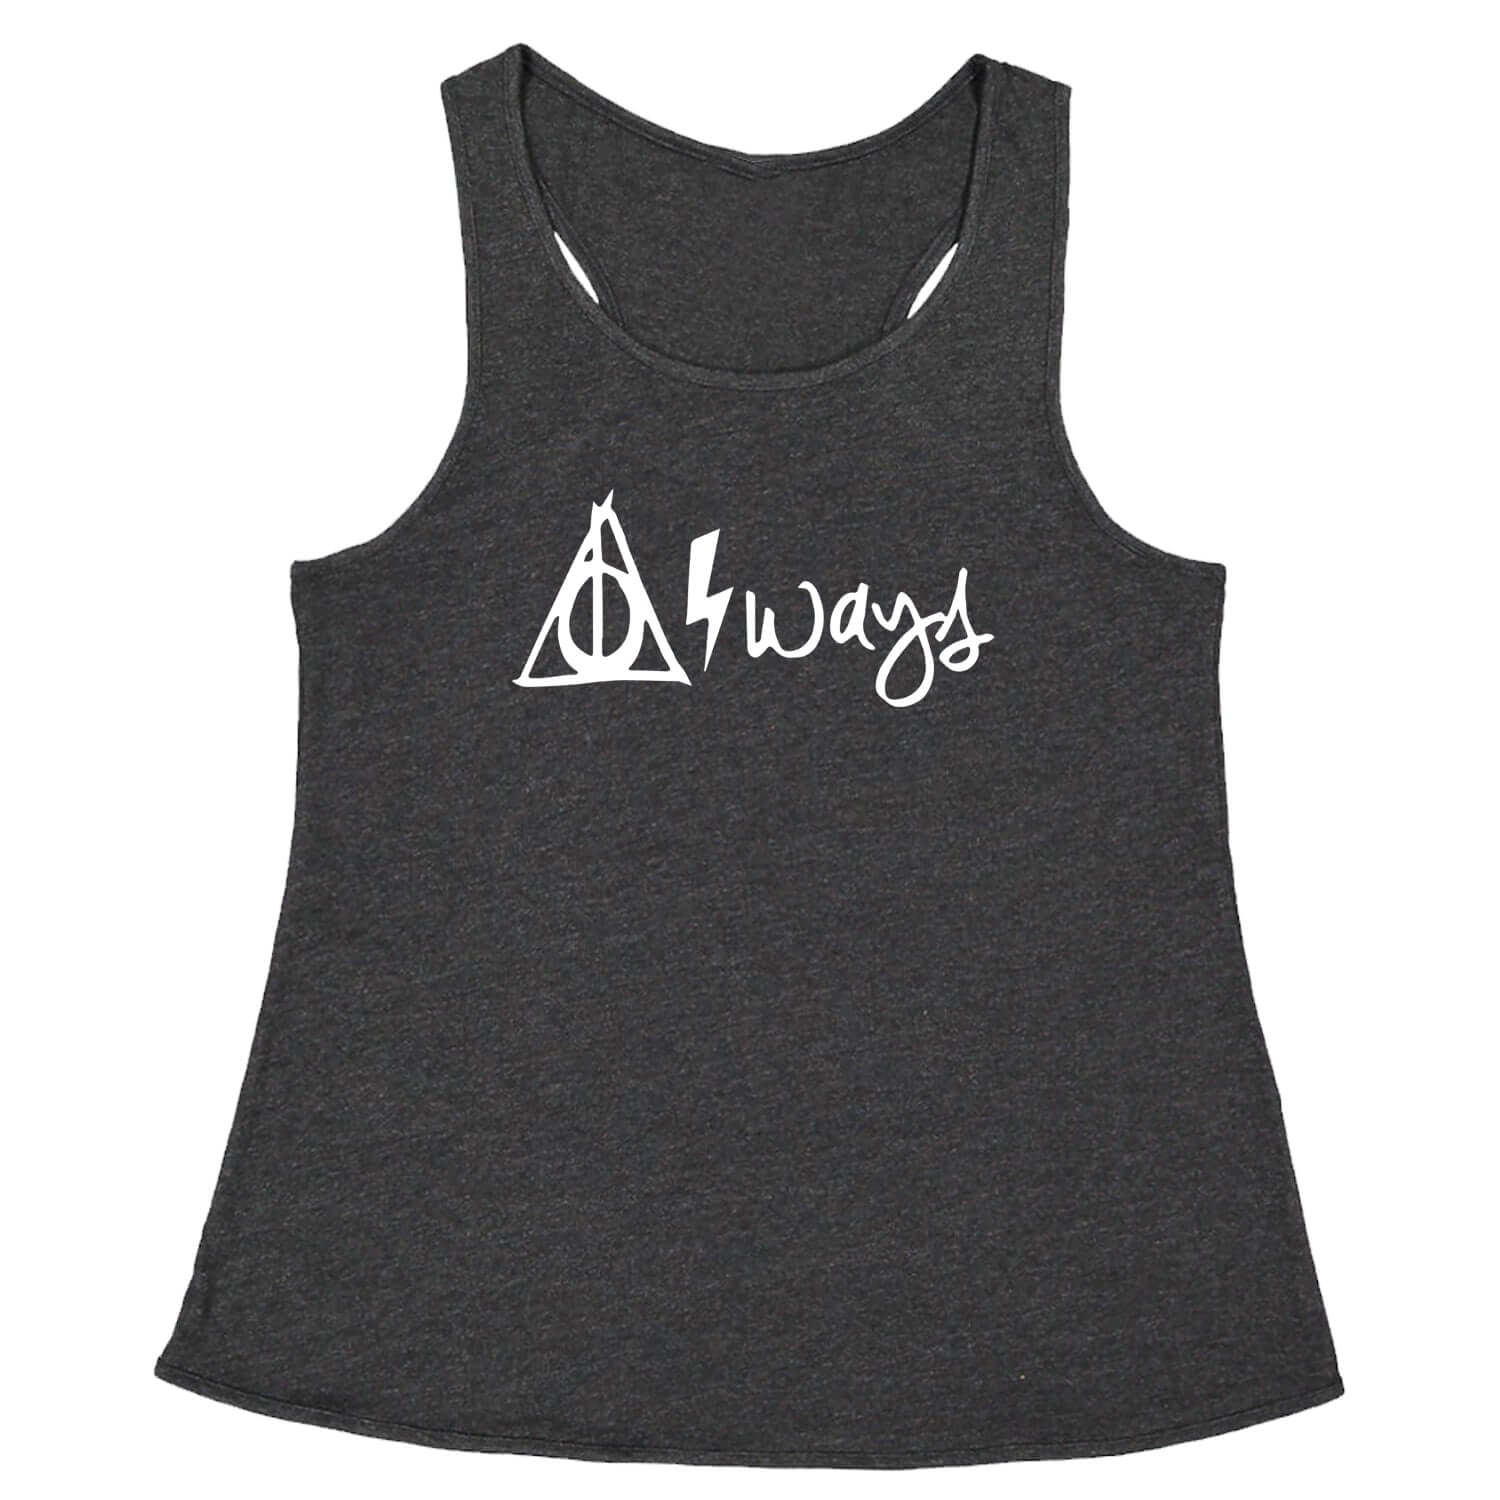 Always Lightning Bolt Racerback Tank Top for Women #expressiontees by Expression Tees